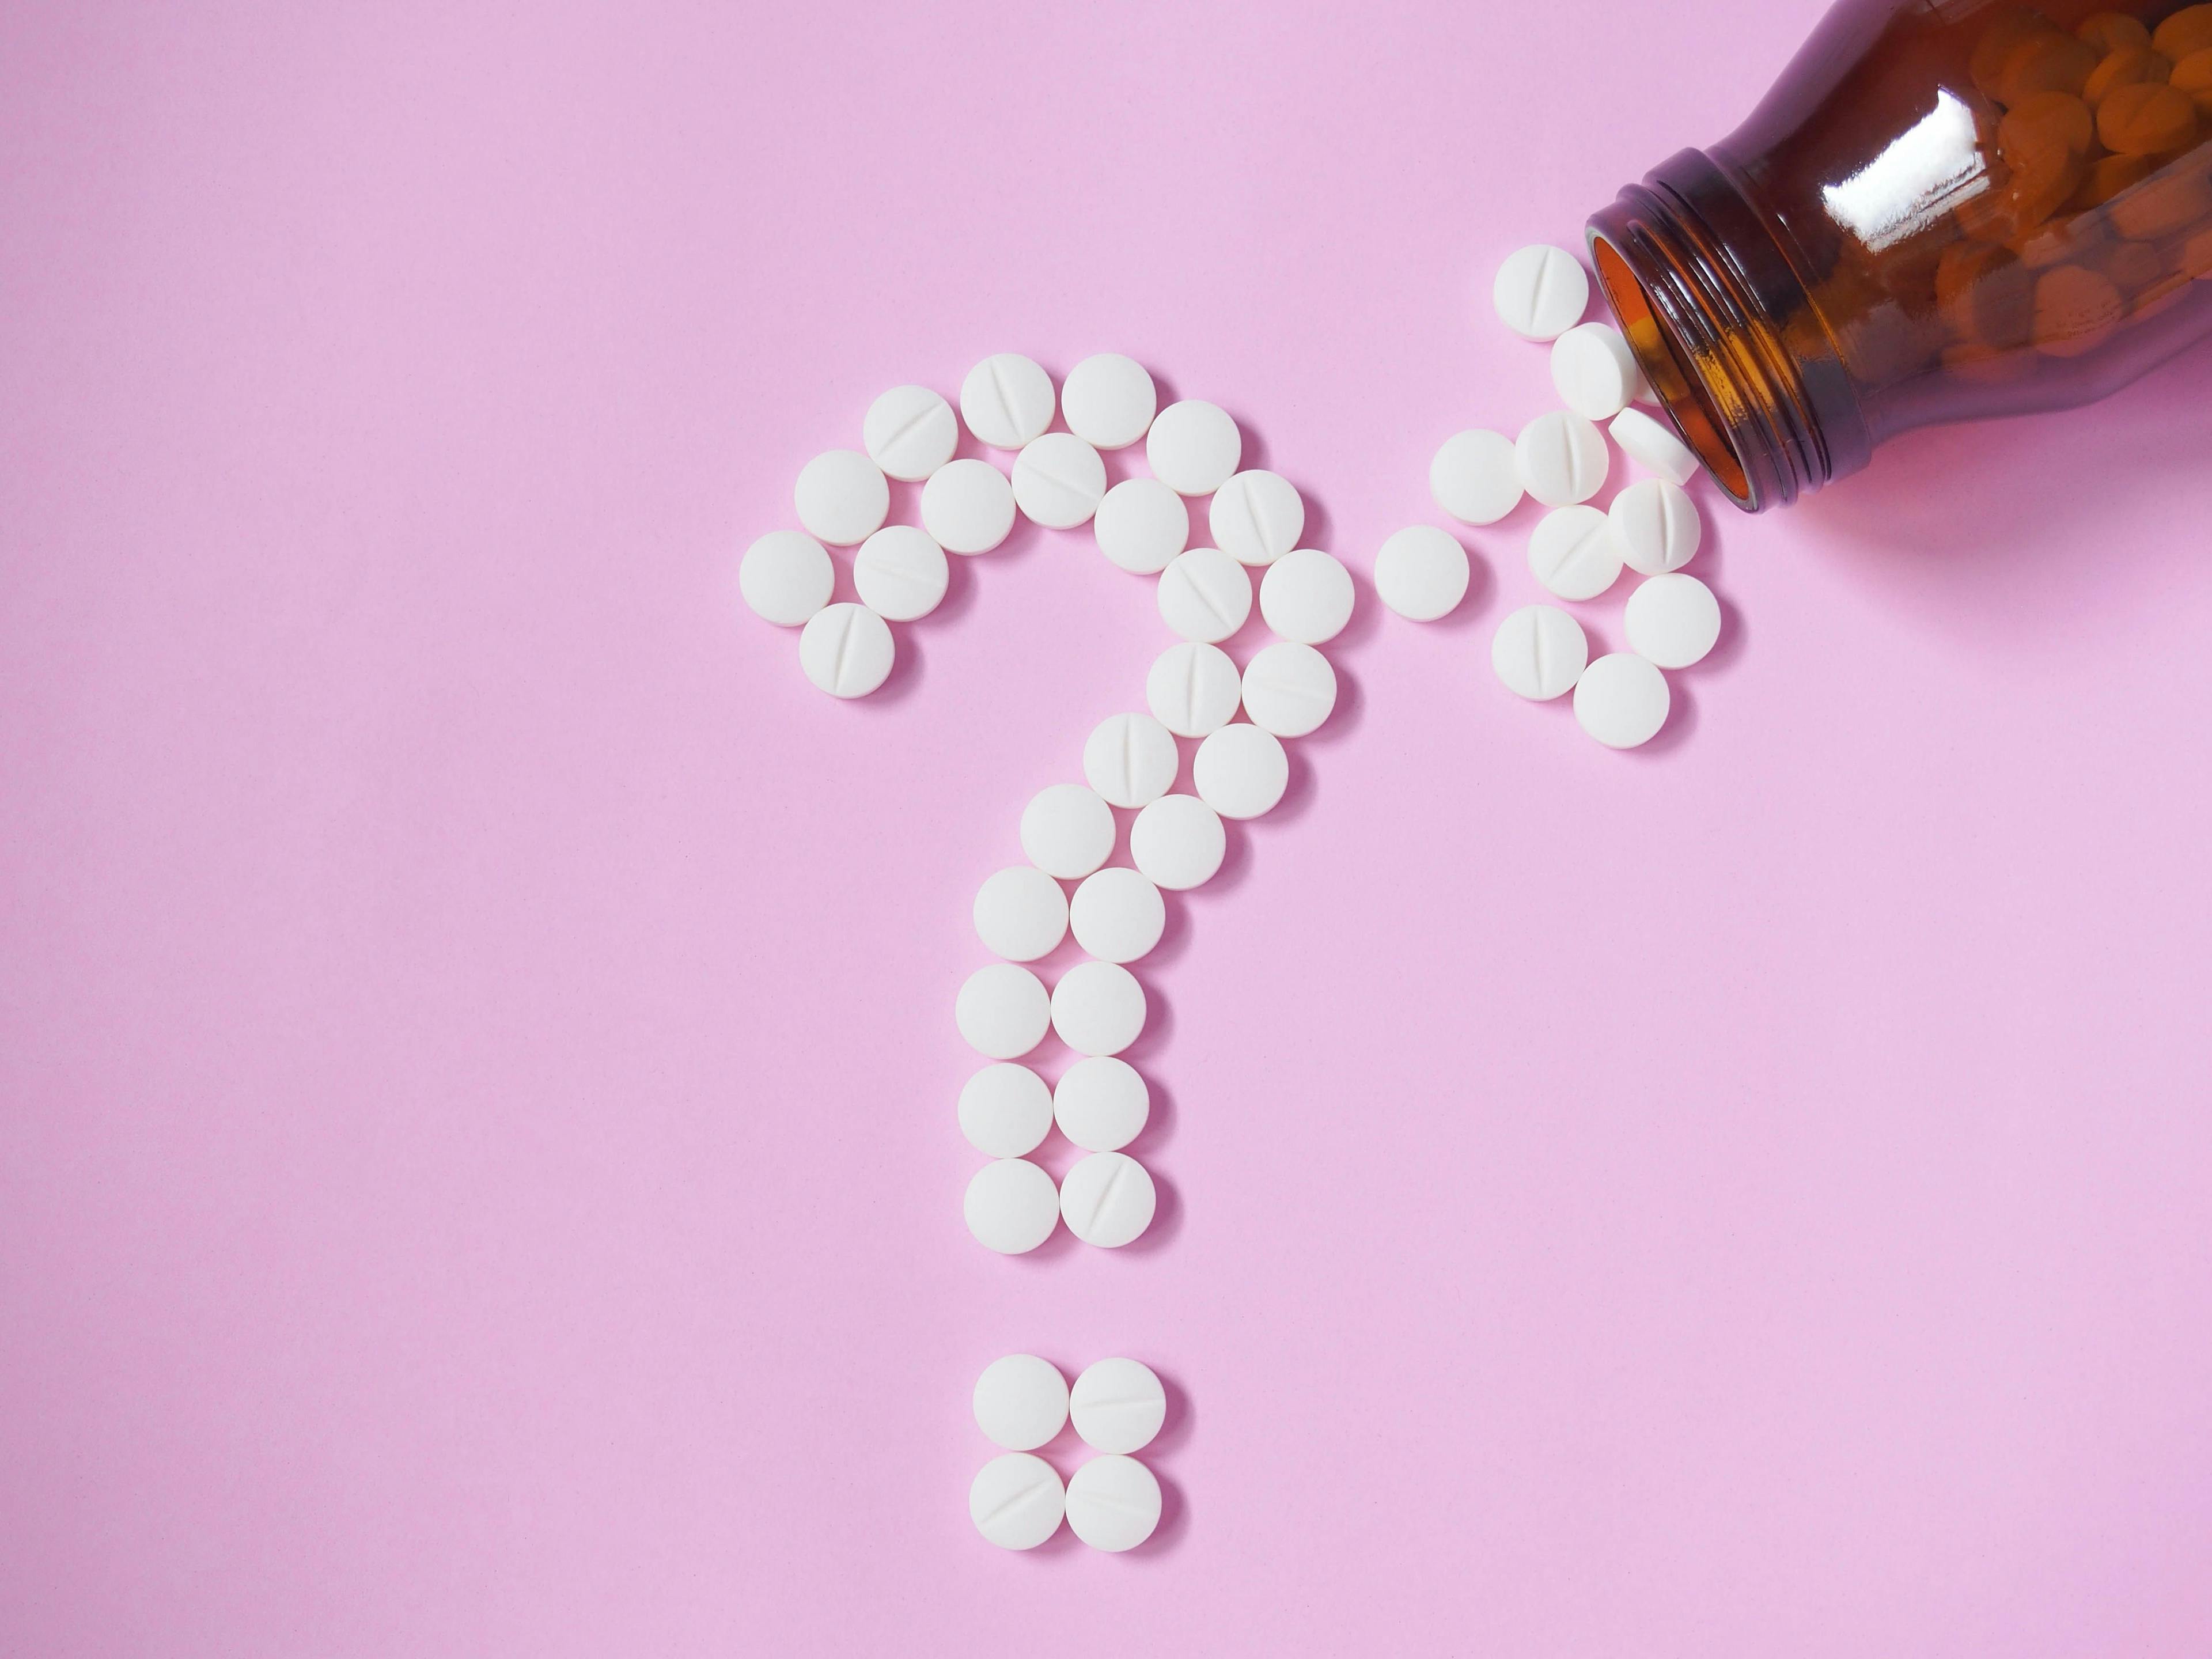 Question mark made by white pills spilling out of brown glass bottle on pink background | Image Credit: Orawan - stock.adobe.com